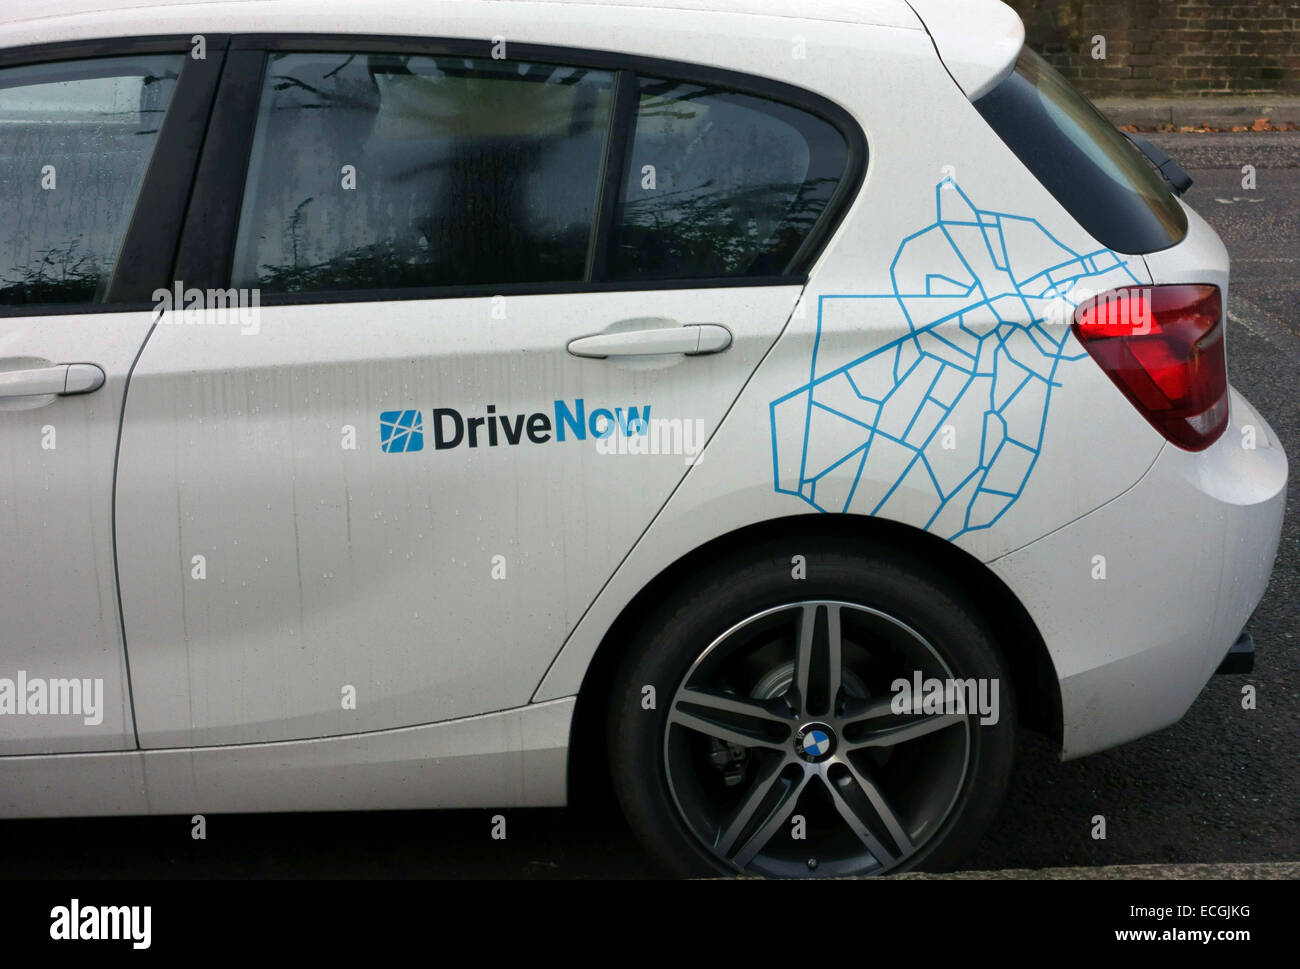 DriveNow is a car sharing scheme by Sixt rental company and BMW cars, London Stock Photo